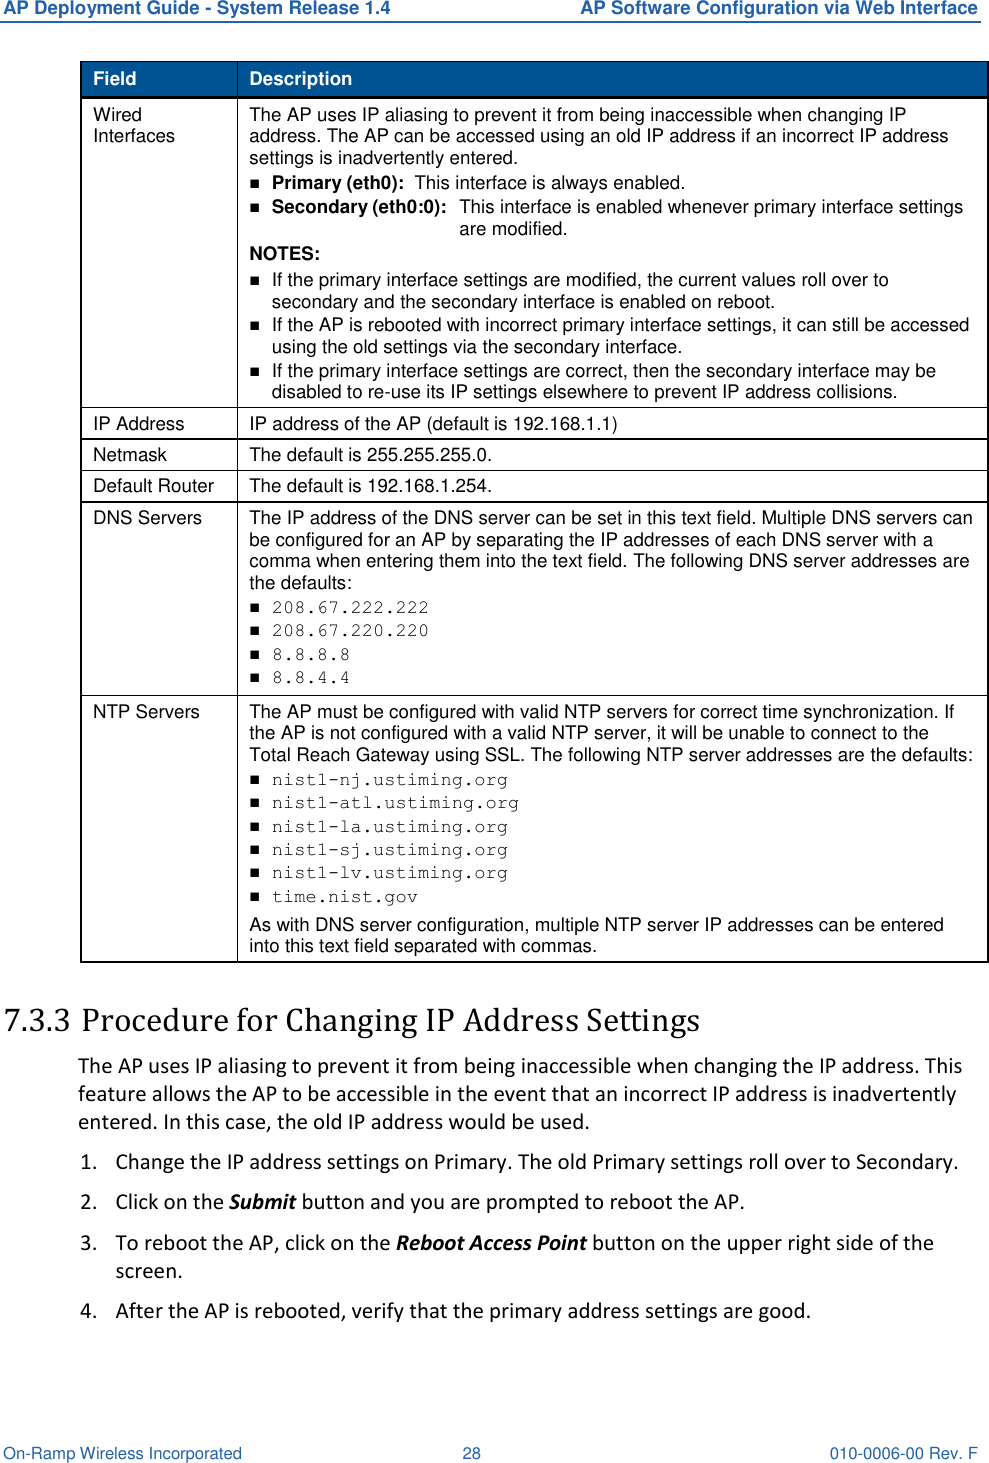 AP Deployment Guide - System Release 1.4  AP Software Configuration via Web Interface On-Ramp Wireless Incorporated  28 010-0006-00 Rev. F Field Description Wired Interfaces The AP uses IP aliasing to prevent it from being inaccessible when changing IP address. The AP can be accessed using an old IP address if an incorrect IP address settings is inadvertently entered.  Primary (eth0):  This interface is always enabled.   Secondary (eth0:0):  This interface is enabled whenever primary interface settings are modified. NOTES:  If the primary interface settings are modified, the current values roll over to secondary and the secondary interface is enabled on reboot.     If the AP is rebooted with incorrect primary interface settings, it can still be accessed using the old settings via the secondary interface.  If the primary interface settings are correct, then the secondary interface may be disabled to re-use its IP settings elsewhere to prevent IP address collisions. IP Address IP address of the AP (default is 192.168.1.1)  Netmask The default is 255.255.255.0. Default Router The default is 192.168.1.254. DNS Servers The IP address of the DNS server can be set in this text field. Multiple DNS servers can be configured for an AP by separating the IP addresses of each DNS server with a comma when entering them into the text field. The following DNS server addresses are the defaults:  208.67.222.222  208.67.220.220  8.8.8.8  8.8.4.4 NTP Servers The AP must be configured with valid NTP servers for correct time synchronization. If the AP is not configured with a valid NTP server, it will be unable to connect to the Total Reach Gateway using SSL. The following NTP server addresses are the defaults:  nist1-nj.ustiming.org  nist1-atl.ustiming.org  nist1-la.ustiming.org  nist1-sj.ustiming.org  nist1-lv.ustiming.org  time.nist.gov As with DNS server configuration, multiple NTP server IP addresses can be entered into this text field separated with commas.  7.3.3 Procedure for Changing IP Address Settings The AP uses IP aliasing to prevent it from being inaccessible when changing the IP address. This feature allows the AP to be accessible in the event that an incorrect IP address is inadvertently entered. In this case, the old IP address would be used. 1. Change the IP address settings on Primary. The old Primary settings roll over to Secondary. 2. Click on the Submit button and you are prompted to reboot the AP.  3. To reboot the AP, click on the Reboot Access Point button on the upper right side of the screen. 4. After the AP is rebooted, verify that the primary address settings are good. 